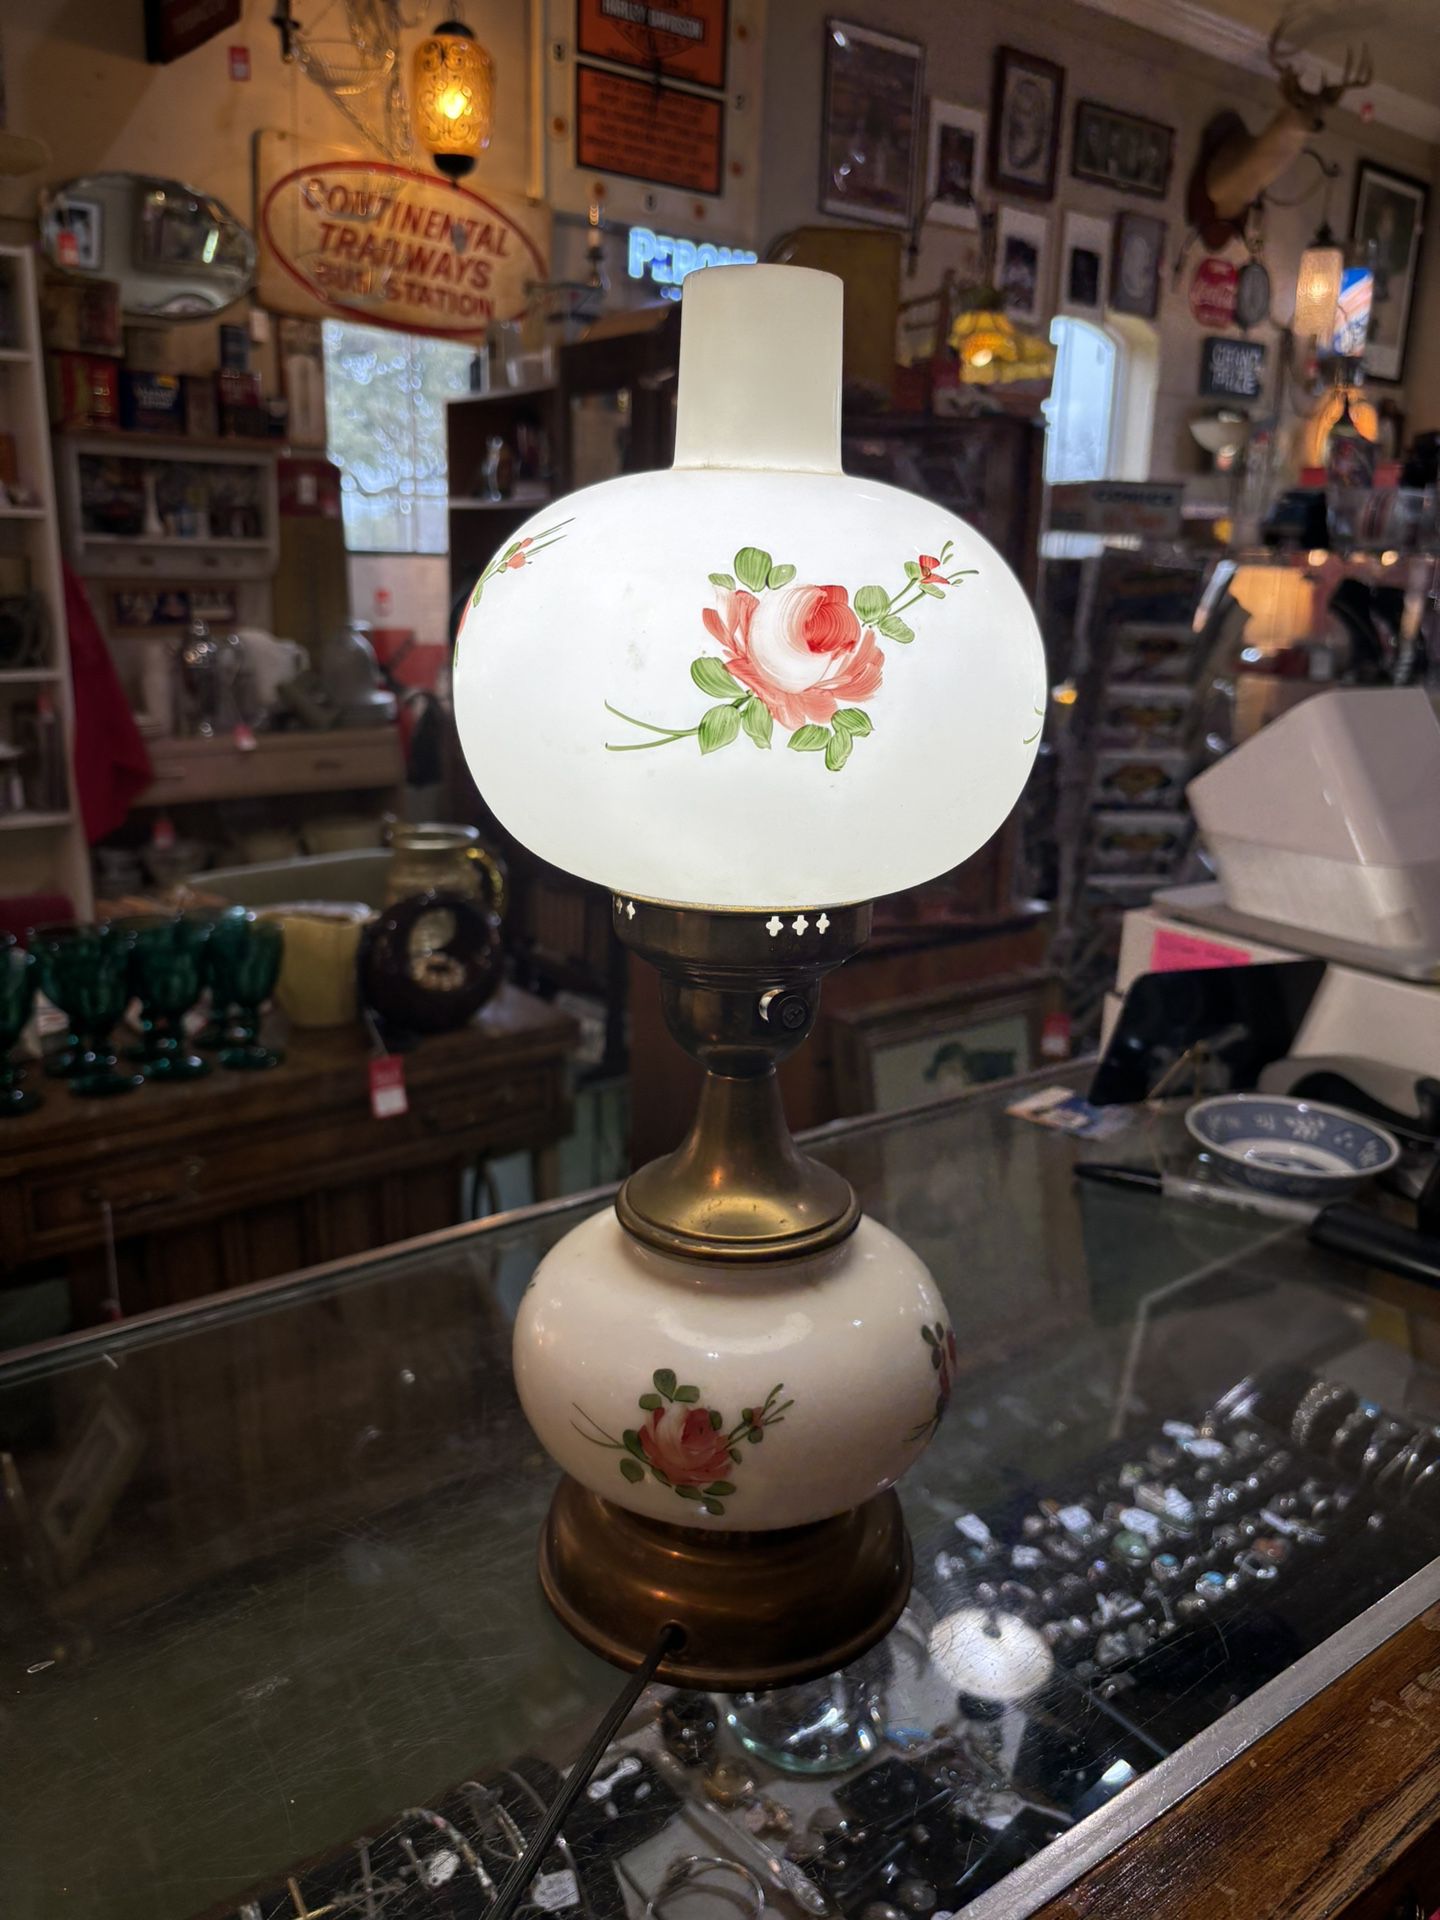 6x18 mini hurricane GONE WITH THE WIND LAMP.  45.00. Johanna at Antiques and More. Located at 316b Main Street Buda. Antiques vintage retro furniture 